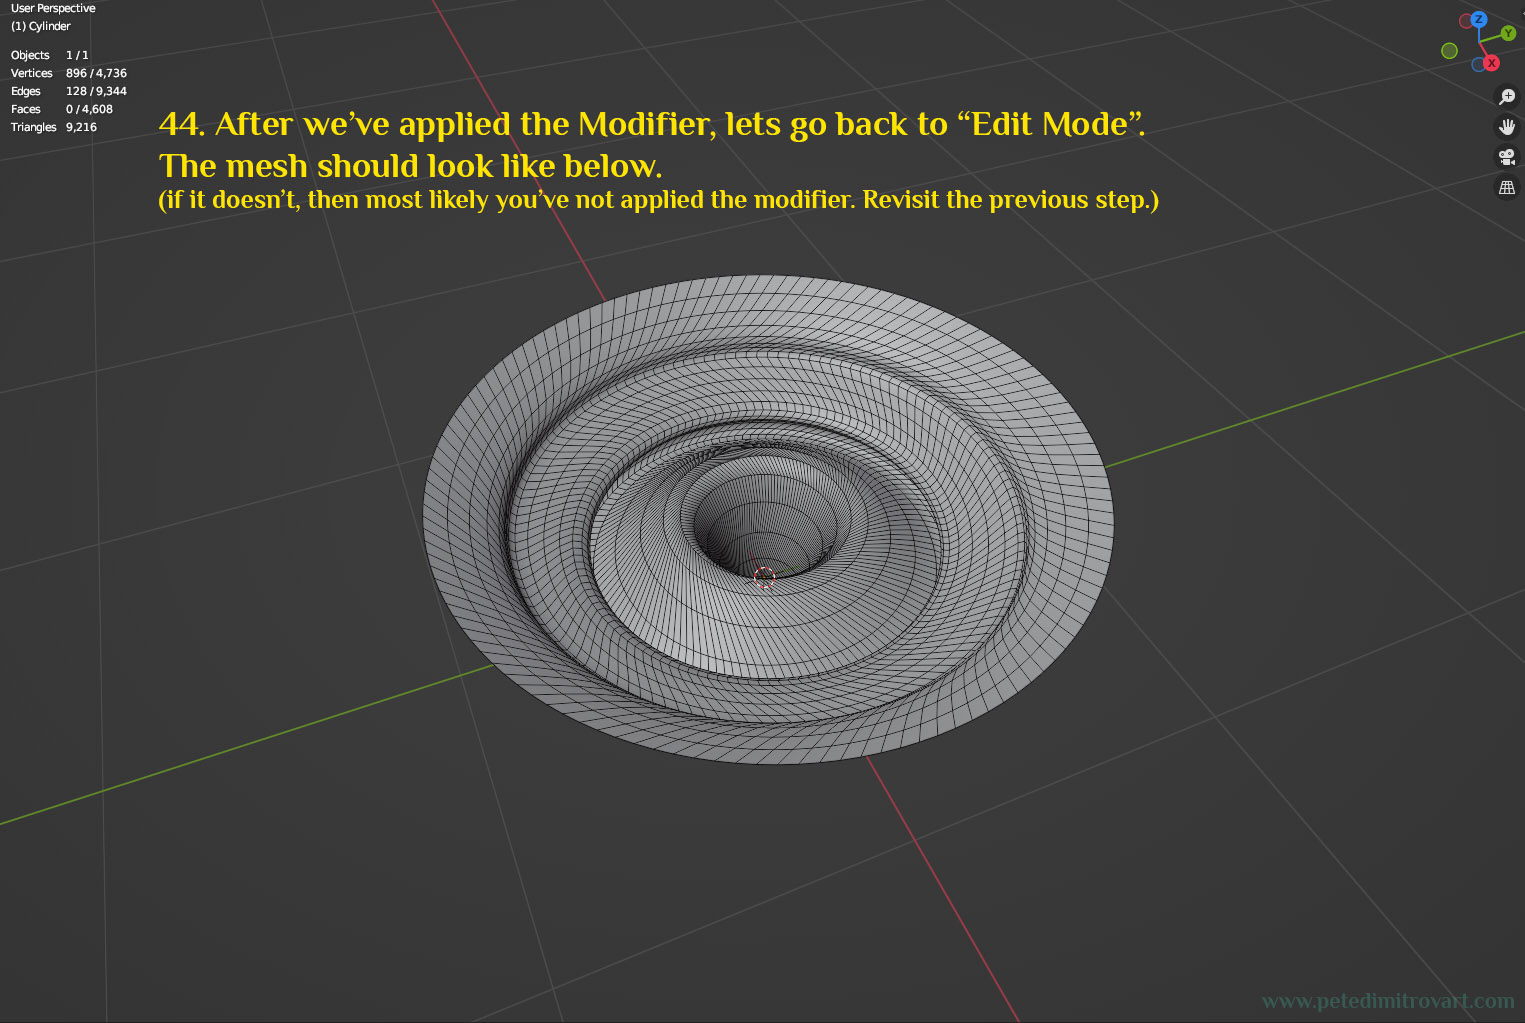 Mesh is seen with a now dense wireframe. This wireframe is visible in “Edit Mode” because we’ve applied the modifier and are looking at the final geometry as result from it. Yellow text is transcribed above, as usual.